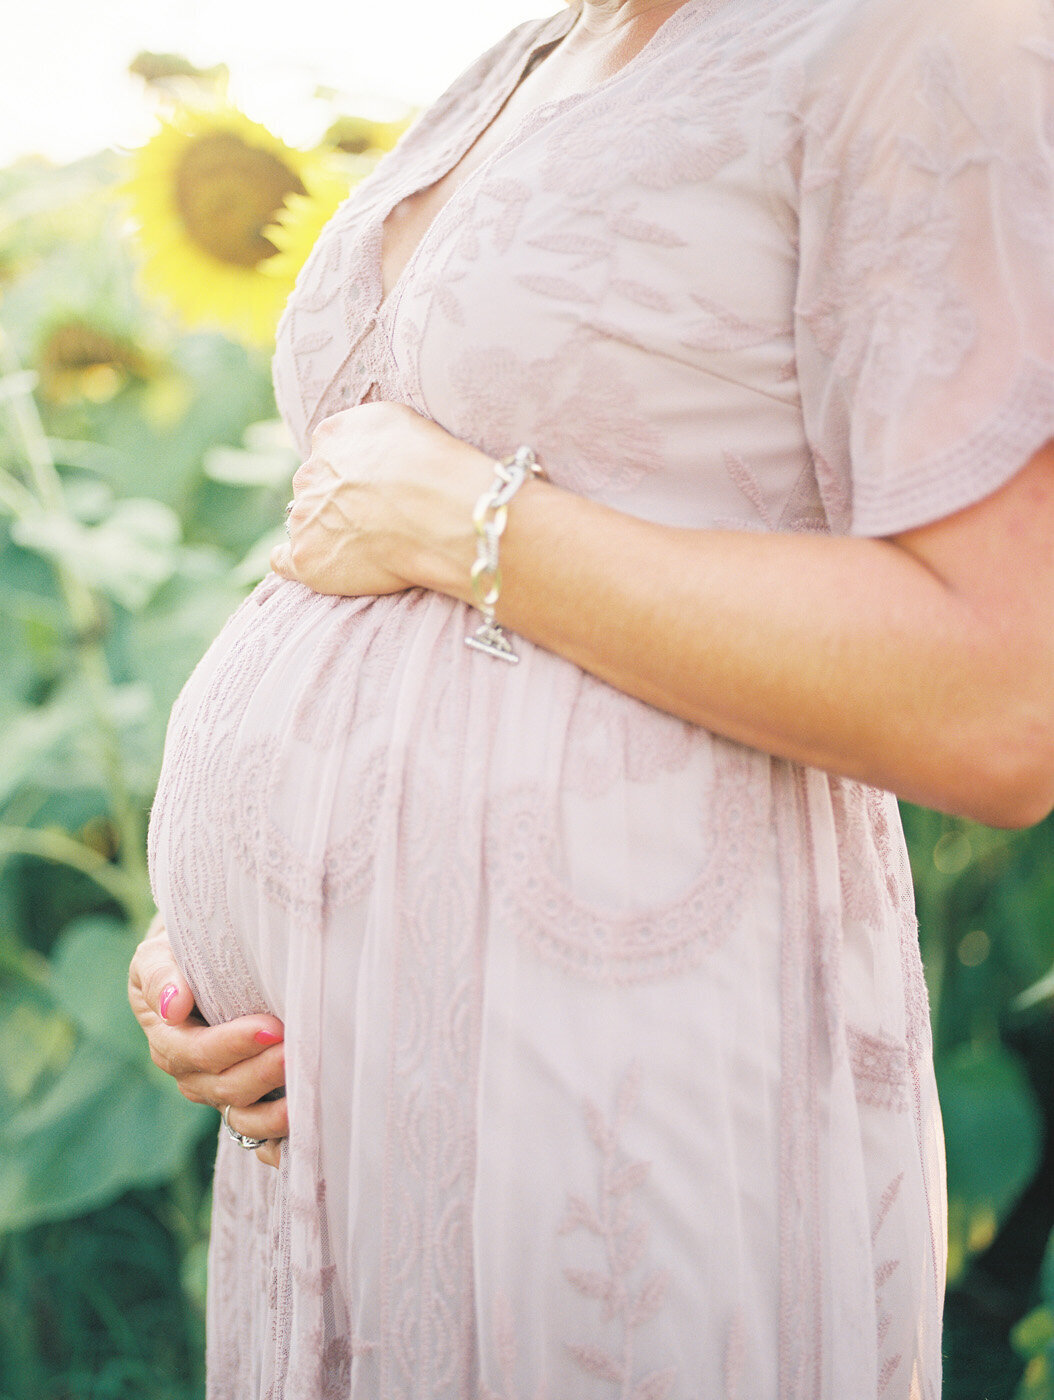 Raleigh Maternity Photographer | Jessica Agee Photography - 010